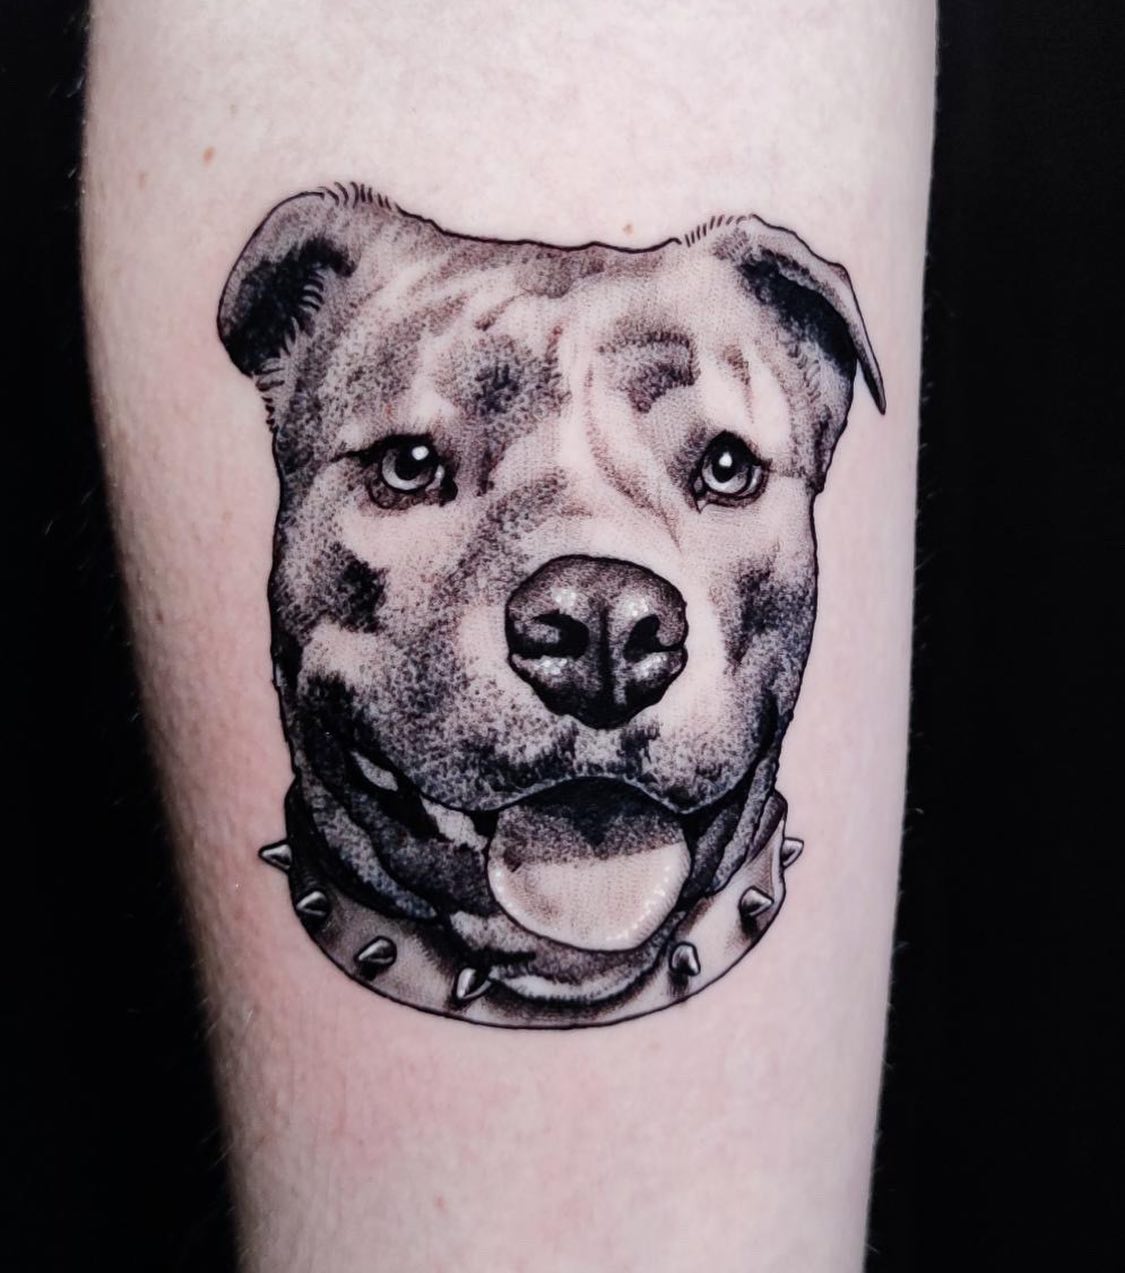 A very good boy by our resident artist emilianoemetattoo

If you’d like to book in with Eme get in contact with him directly or fill in an enquiry form on our website 🖤

       